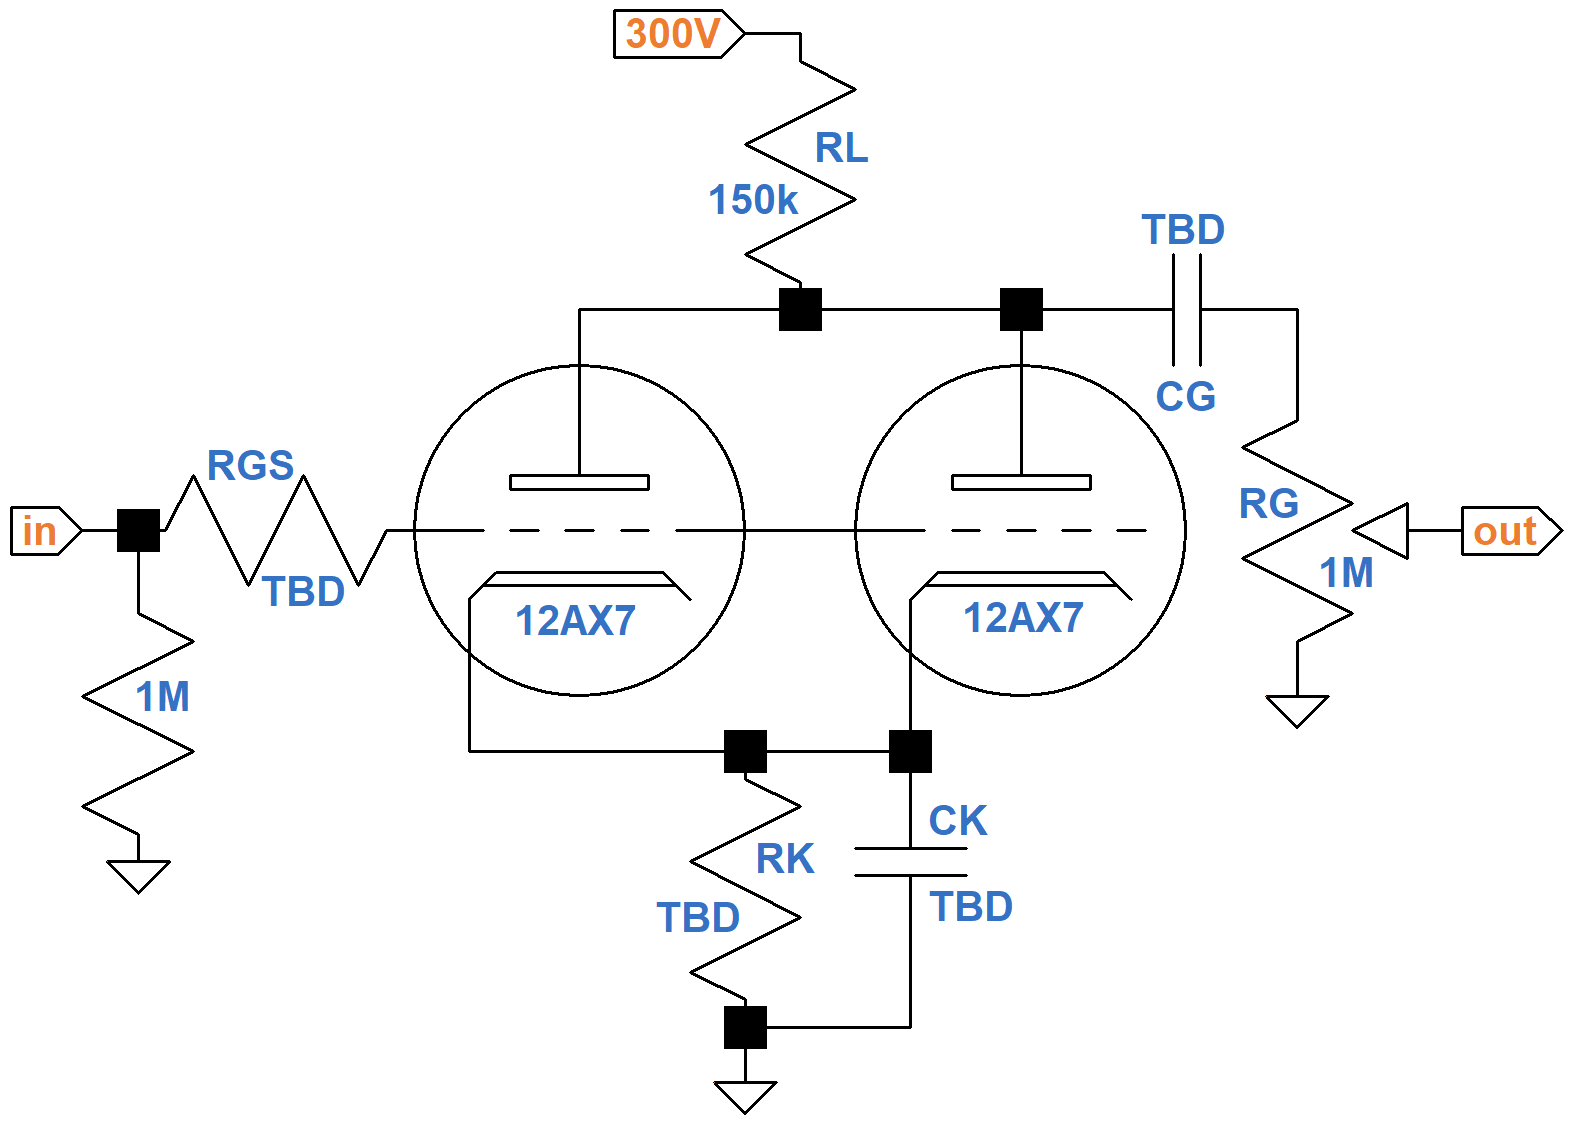 tube type, plate load resistor, and gain control value